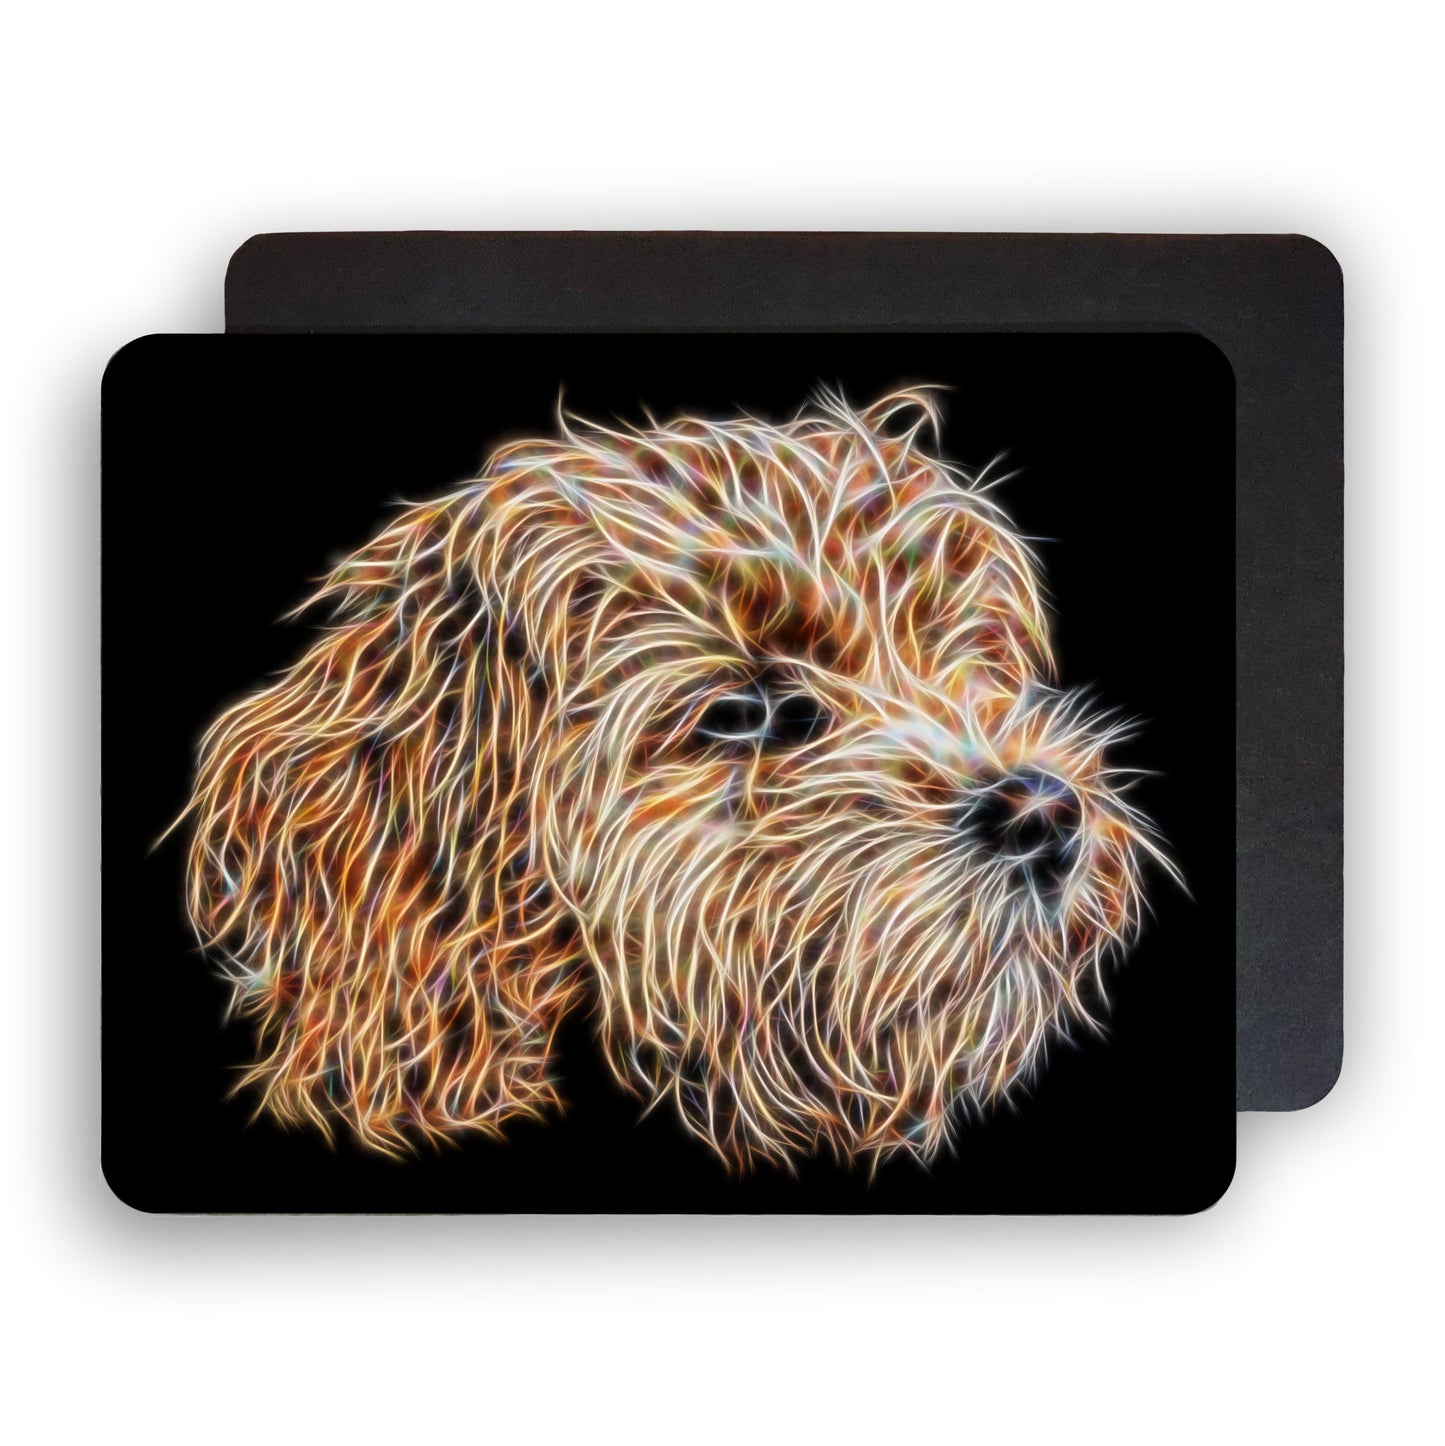 Apricot Cavapoo Placemats with Stunning Fractal Art Design. Set of Two.